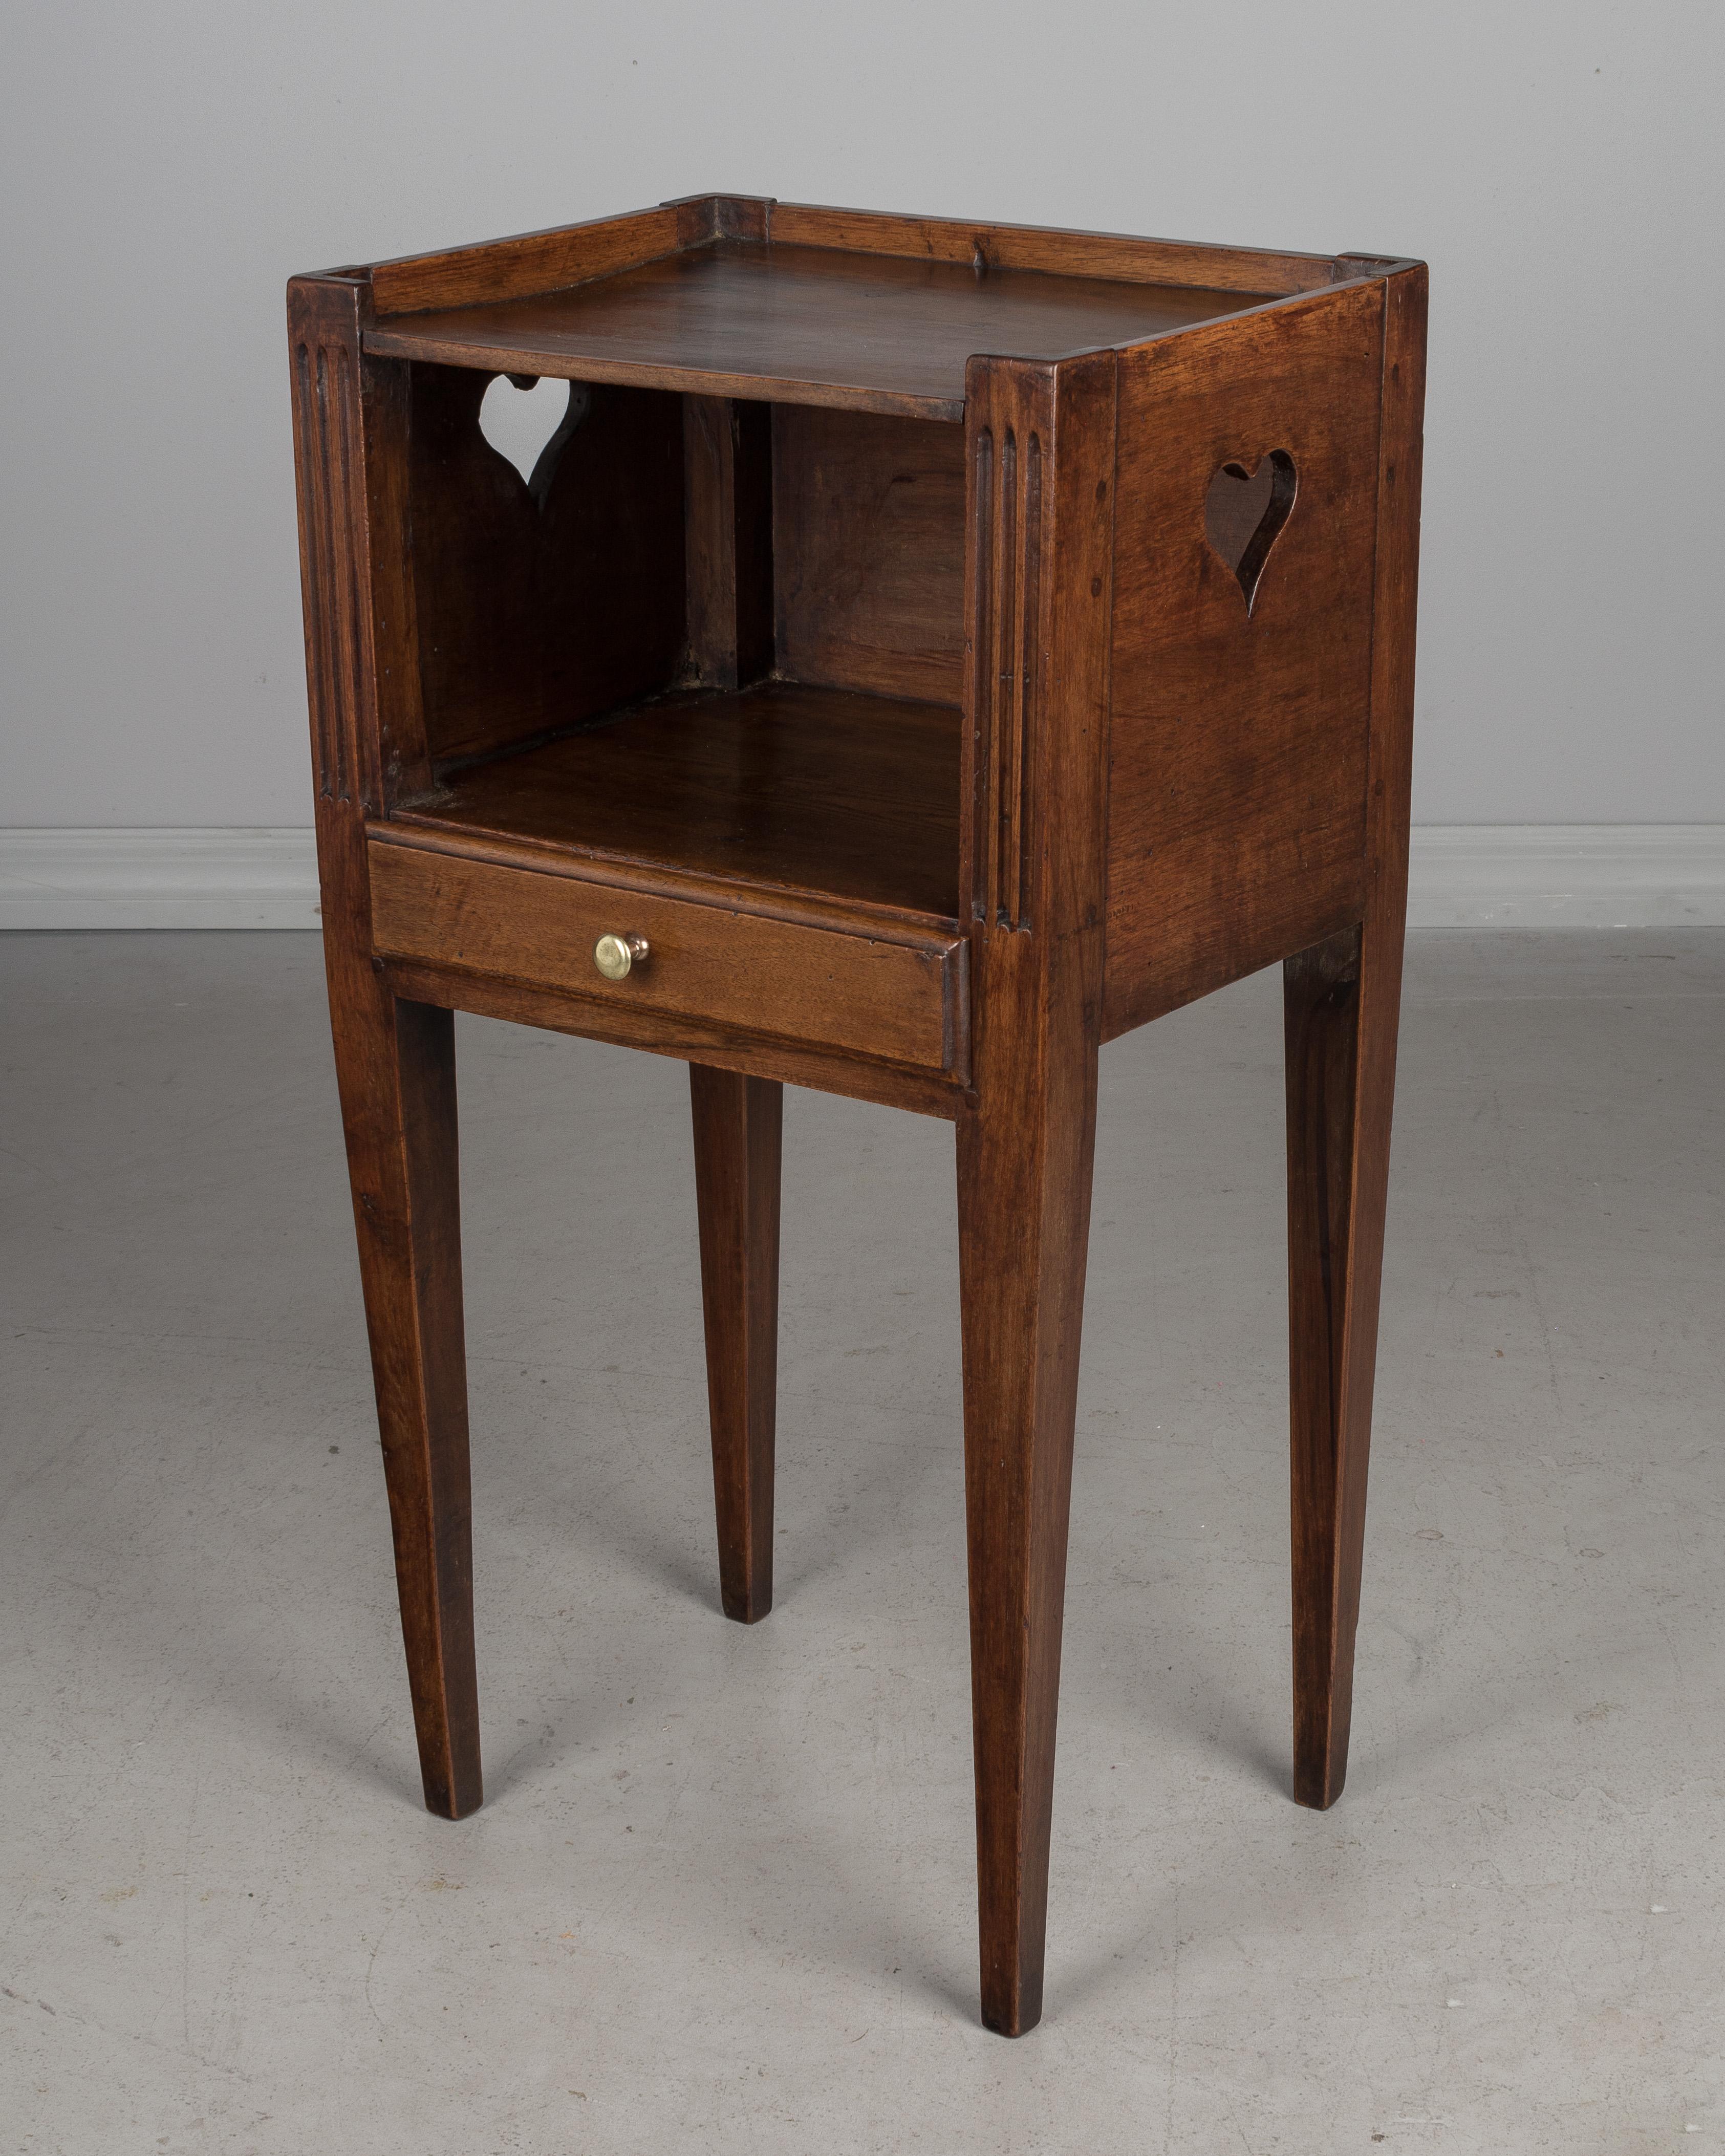 An early 19th century Louis XVI style Country French side table or nightstand made of solid walnut, with pierced heart shaped cut-outs on the sides. Open niche and a shallow drawer with a brass knob. Knob is old but not original. Slender tapered